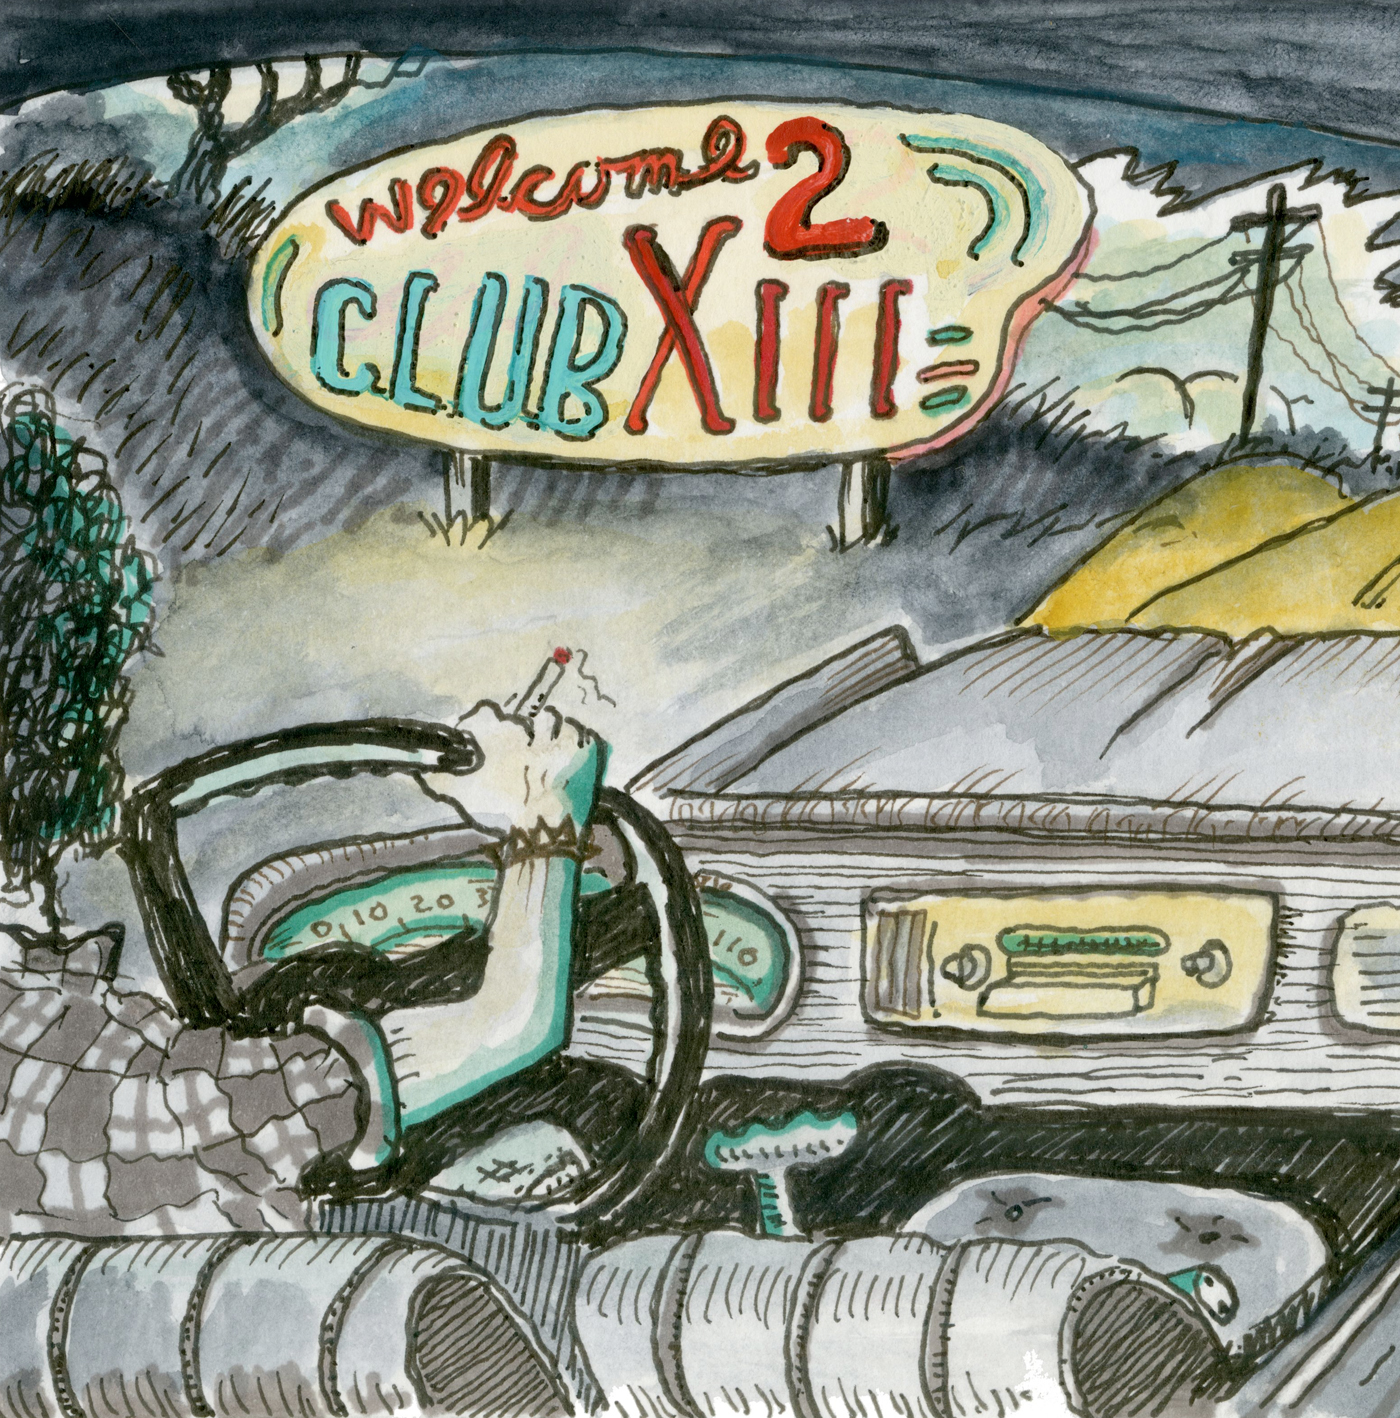 Club XIII by Drive-By Truckers